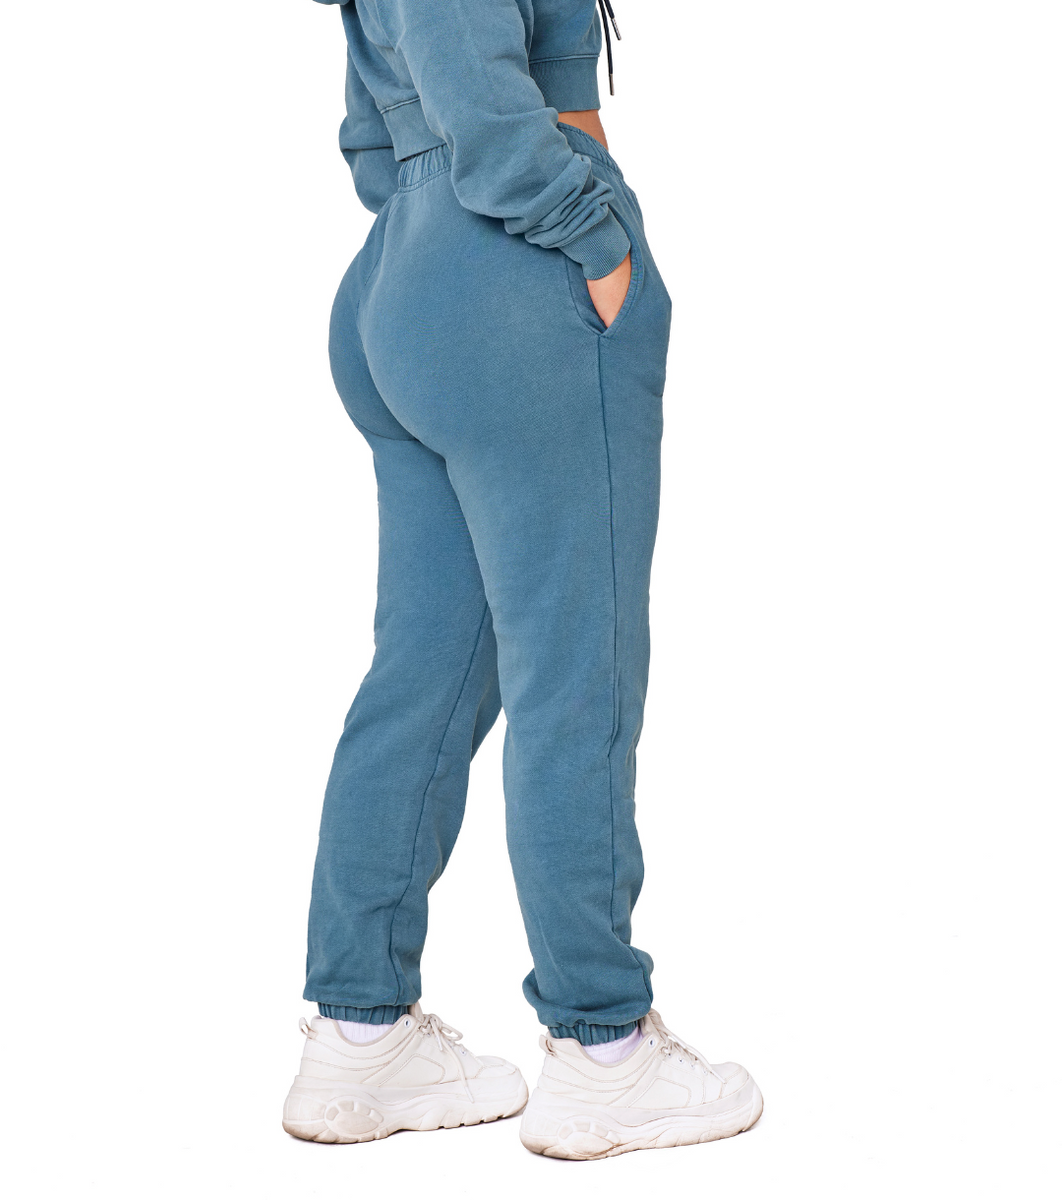 GetUSCart- Dragon Fit Joggers for Women with Pockets,High Waist Workout  Yoga Tapered Sweatpants Women's Lounge Pants (Joggers78-Demin Blue, Small)